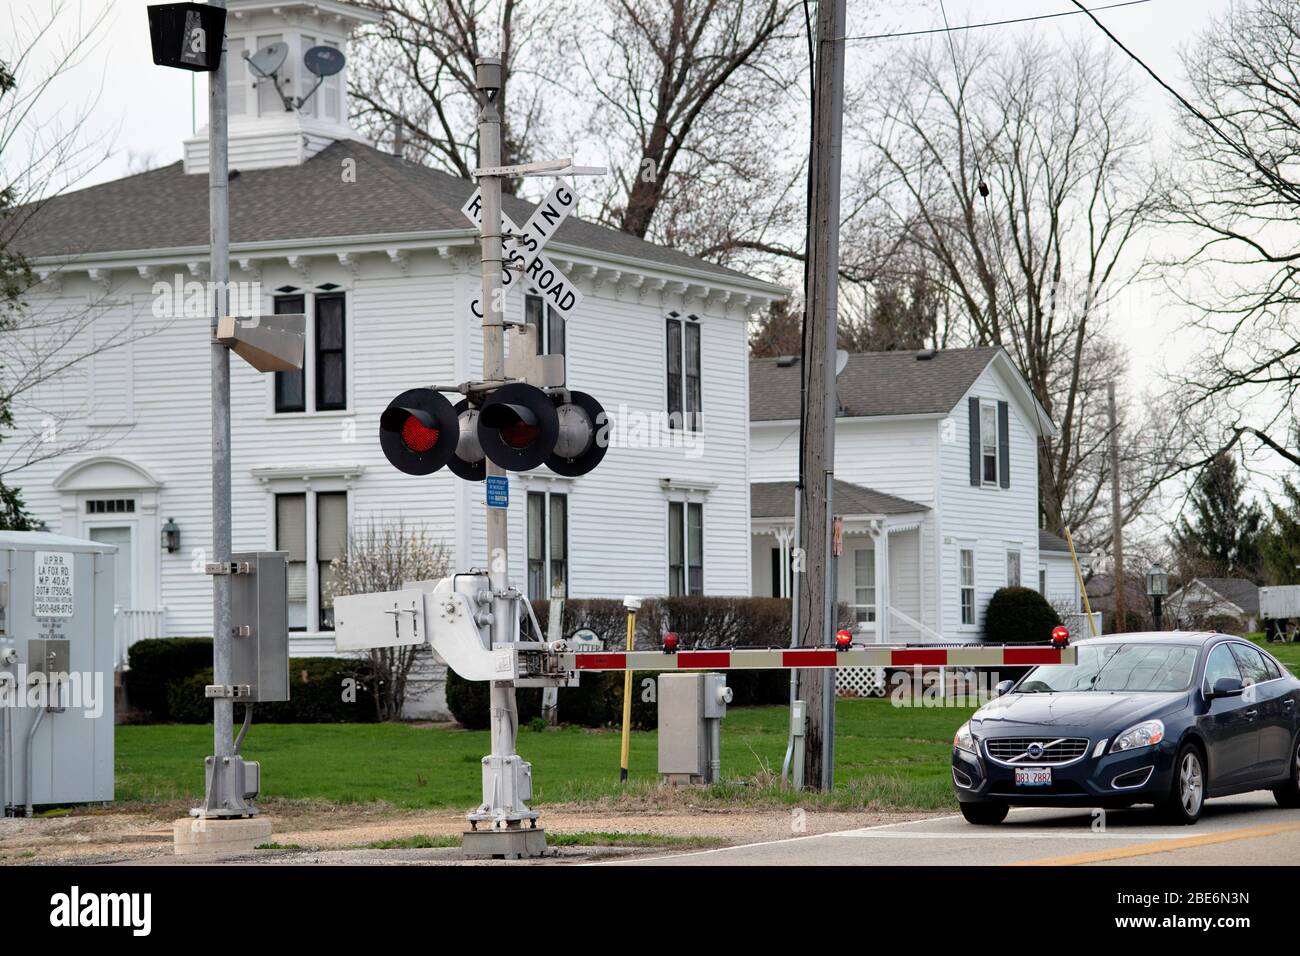 LaFox, Illinois, USA. A just descended road crossing gate with flashing red lights warns motorists of an upcoming freight train. Stock Photo